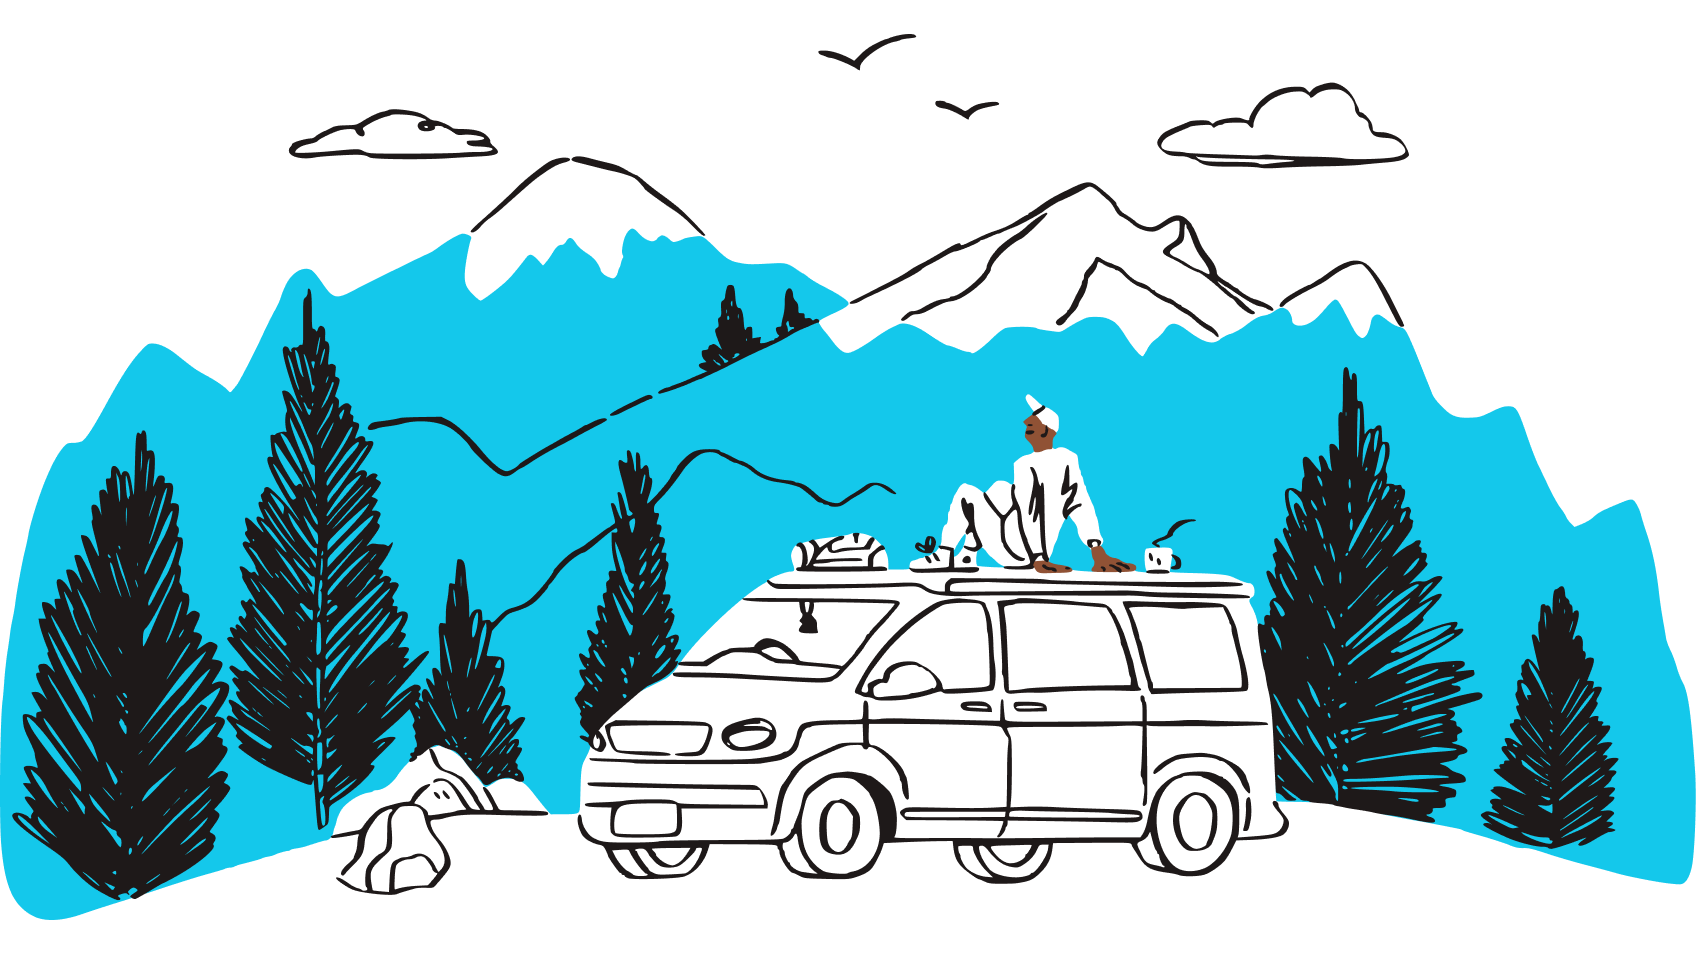 An illustration of a person sat on the roof of a vehicle, admiring the view of a mountain range.